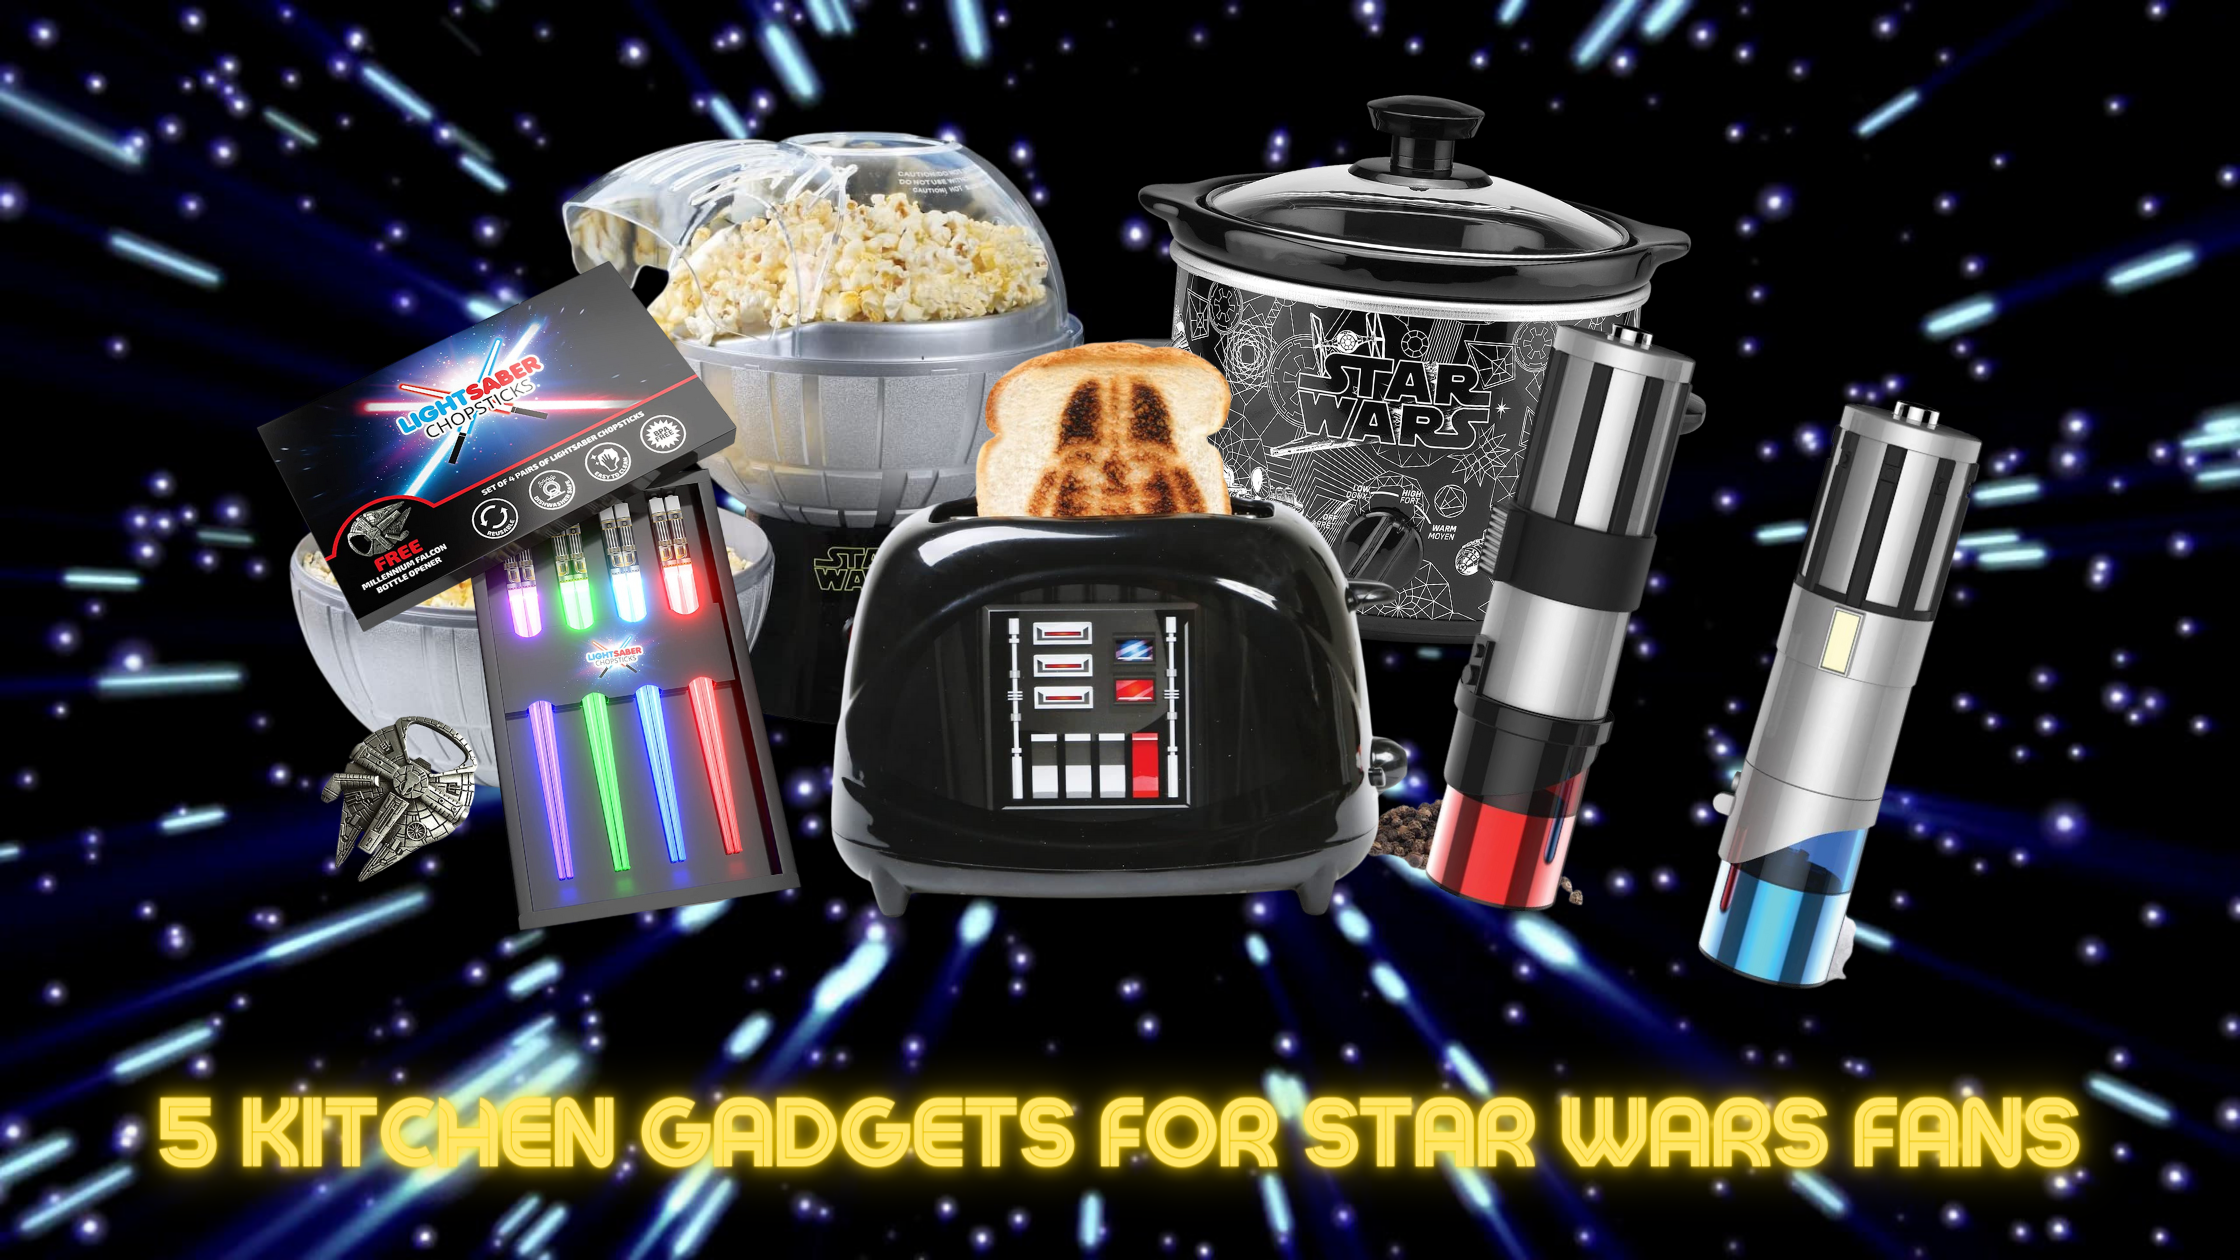 5 Kitchen Gadgets For Star Wars Fans, by Colin Schwager, MBA